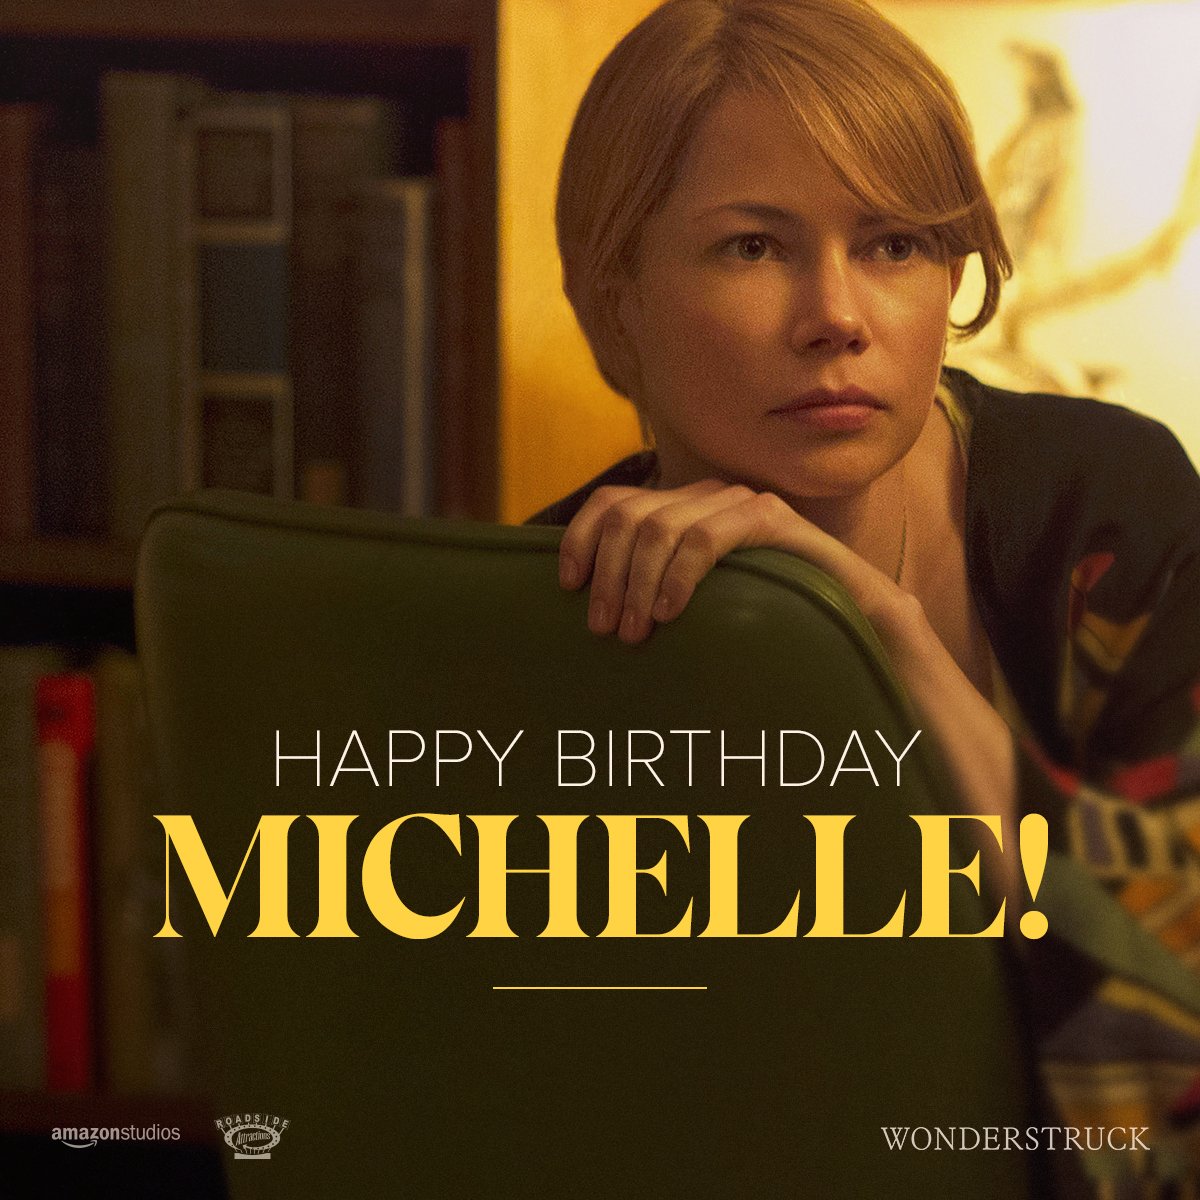 Happy birthday to Michelle Williams! May all your wishes come true. 